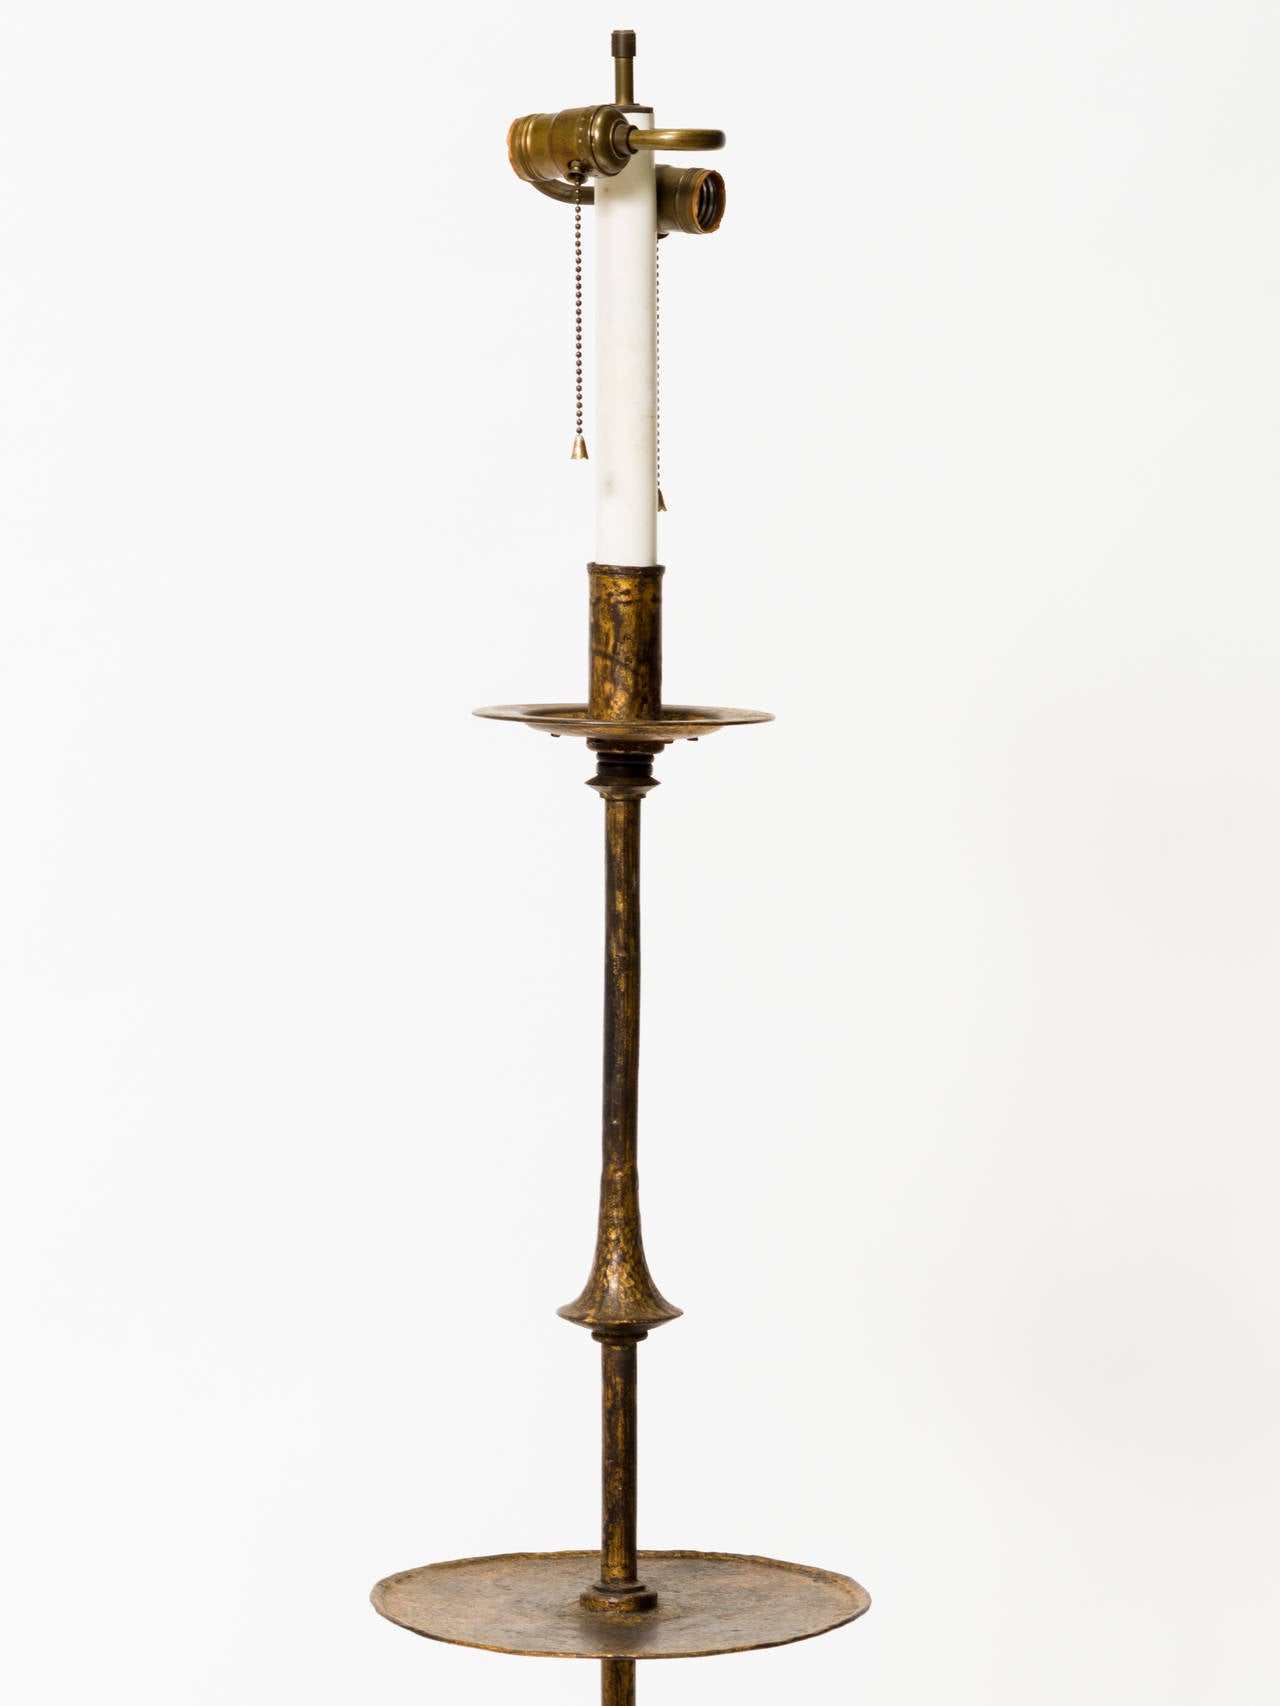 Sculptural gilt iron floor lamp from the 1960s.